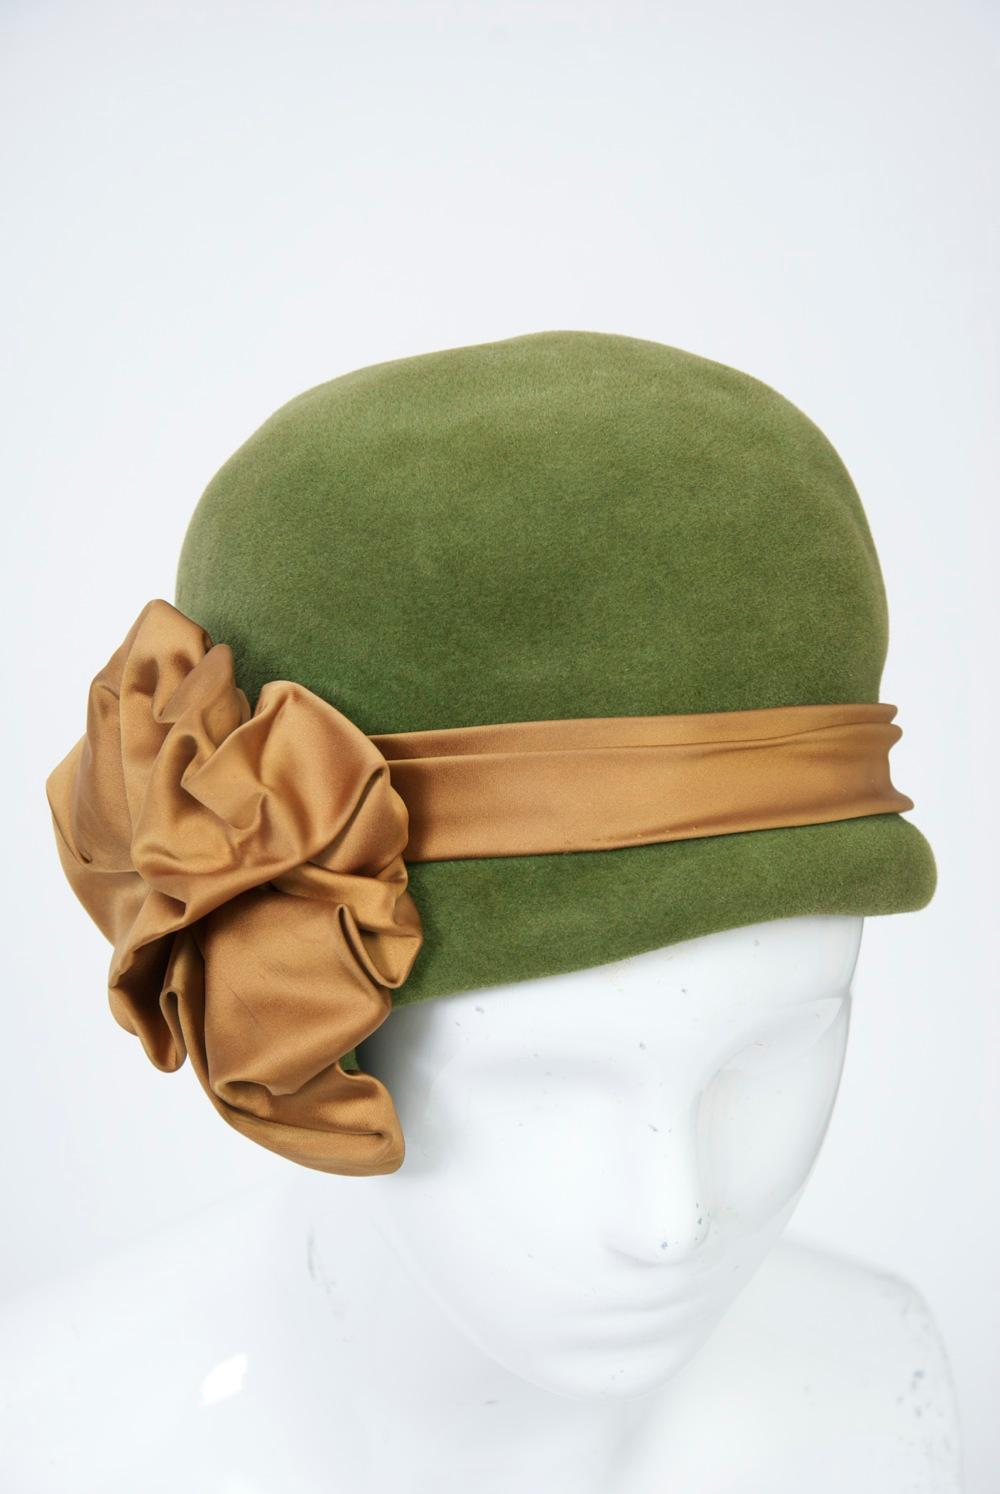 Cloche-style hat in olivey shade of green felt ornamented with a cocoa satin band and large bow on the side. American adaptation of a Pierre Balmain design.